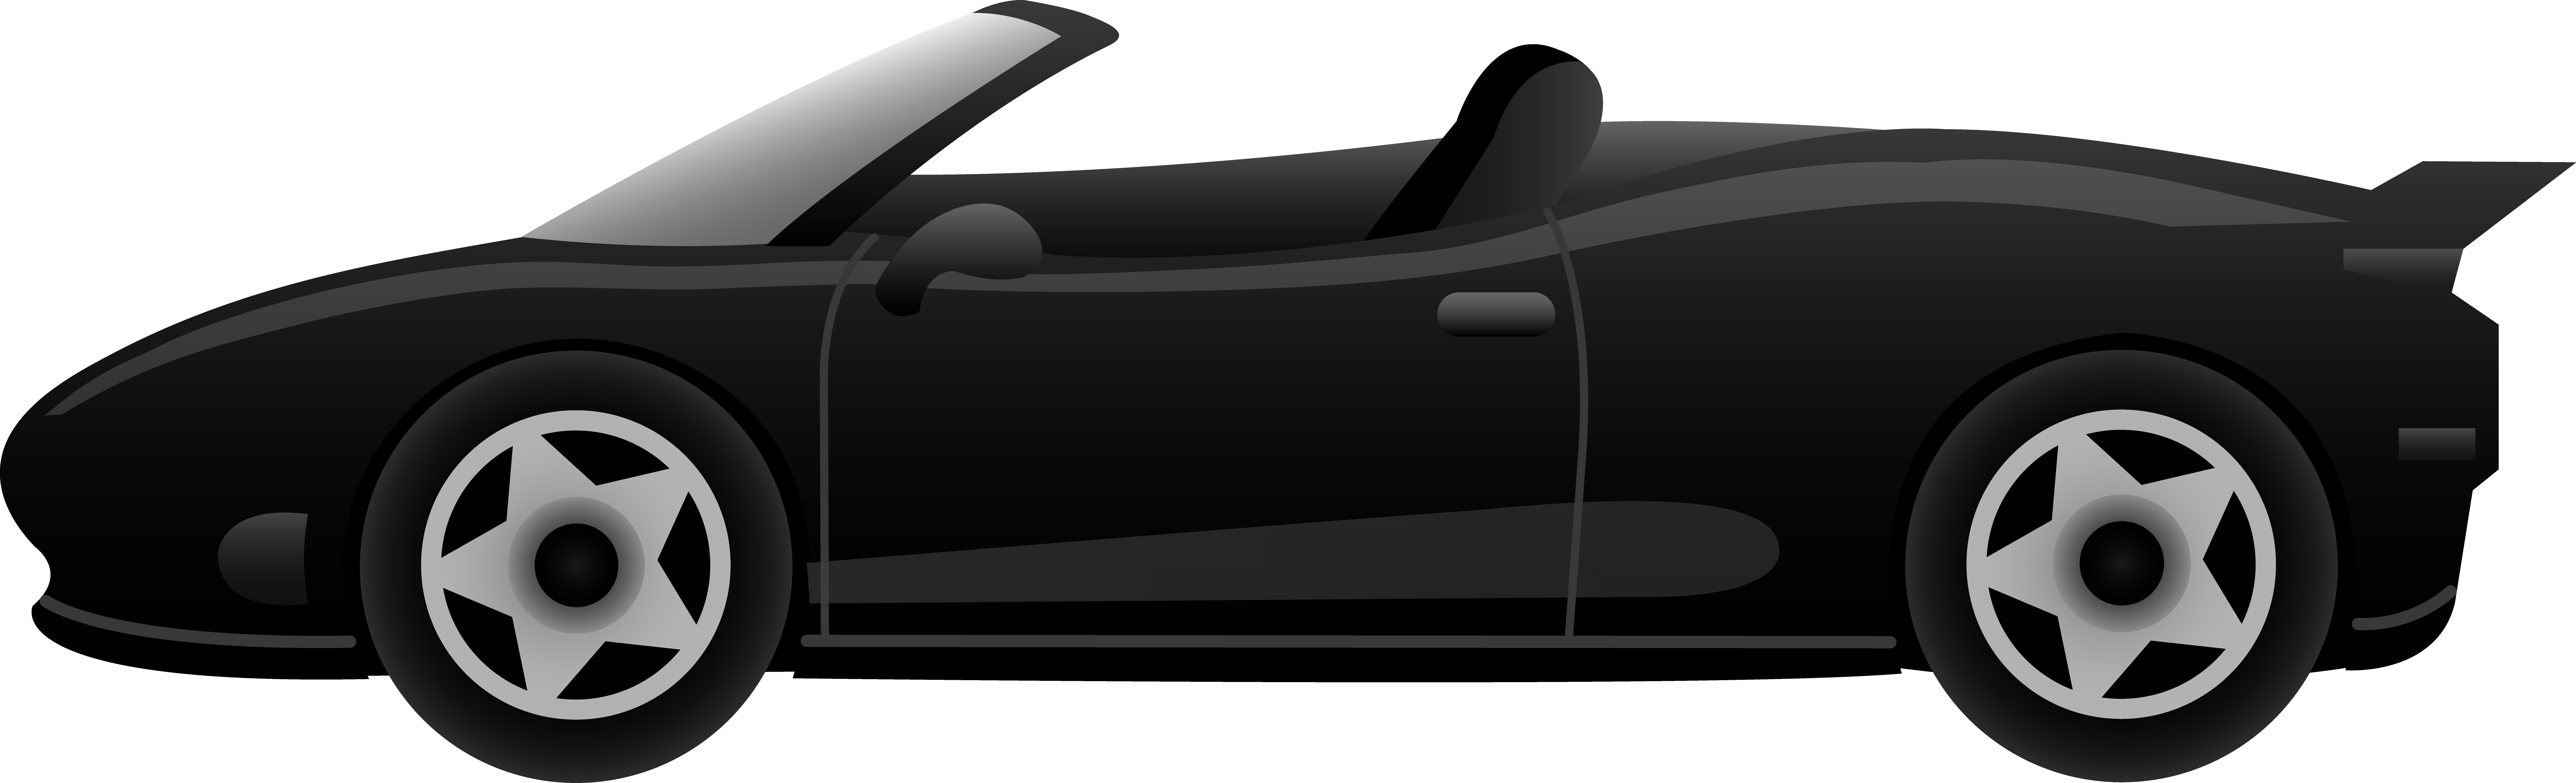 Sports Car Clipart Side View - Free Clipart Images